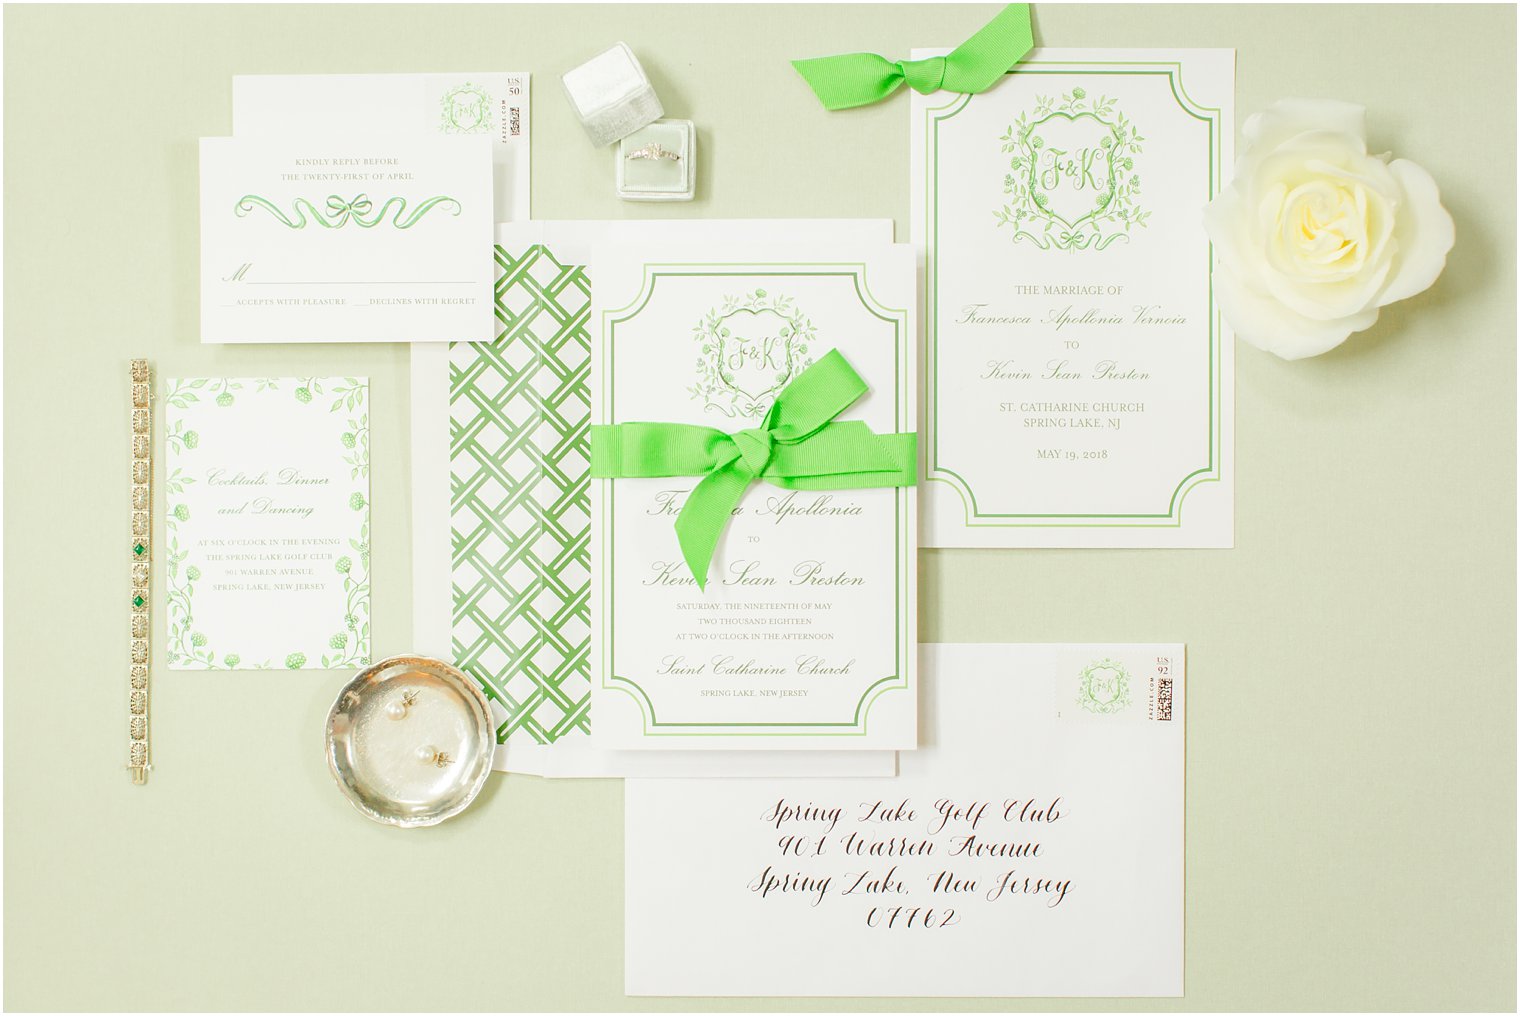 invitation suite on green styling board and invitation with custom wedding crest